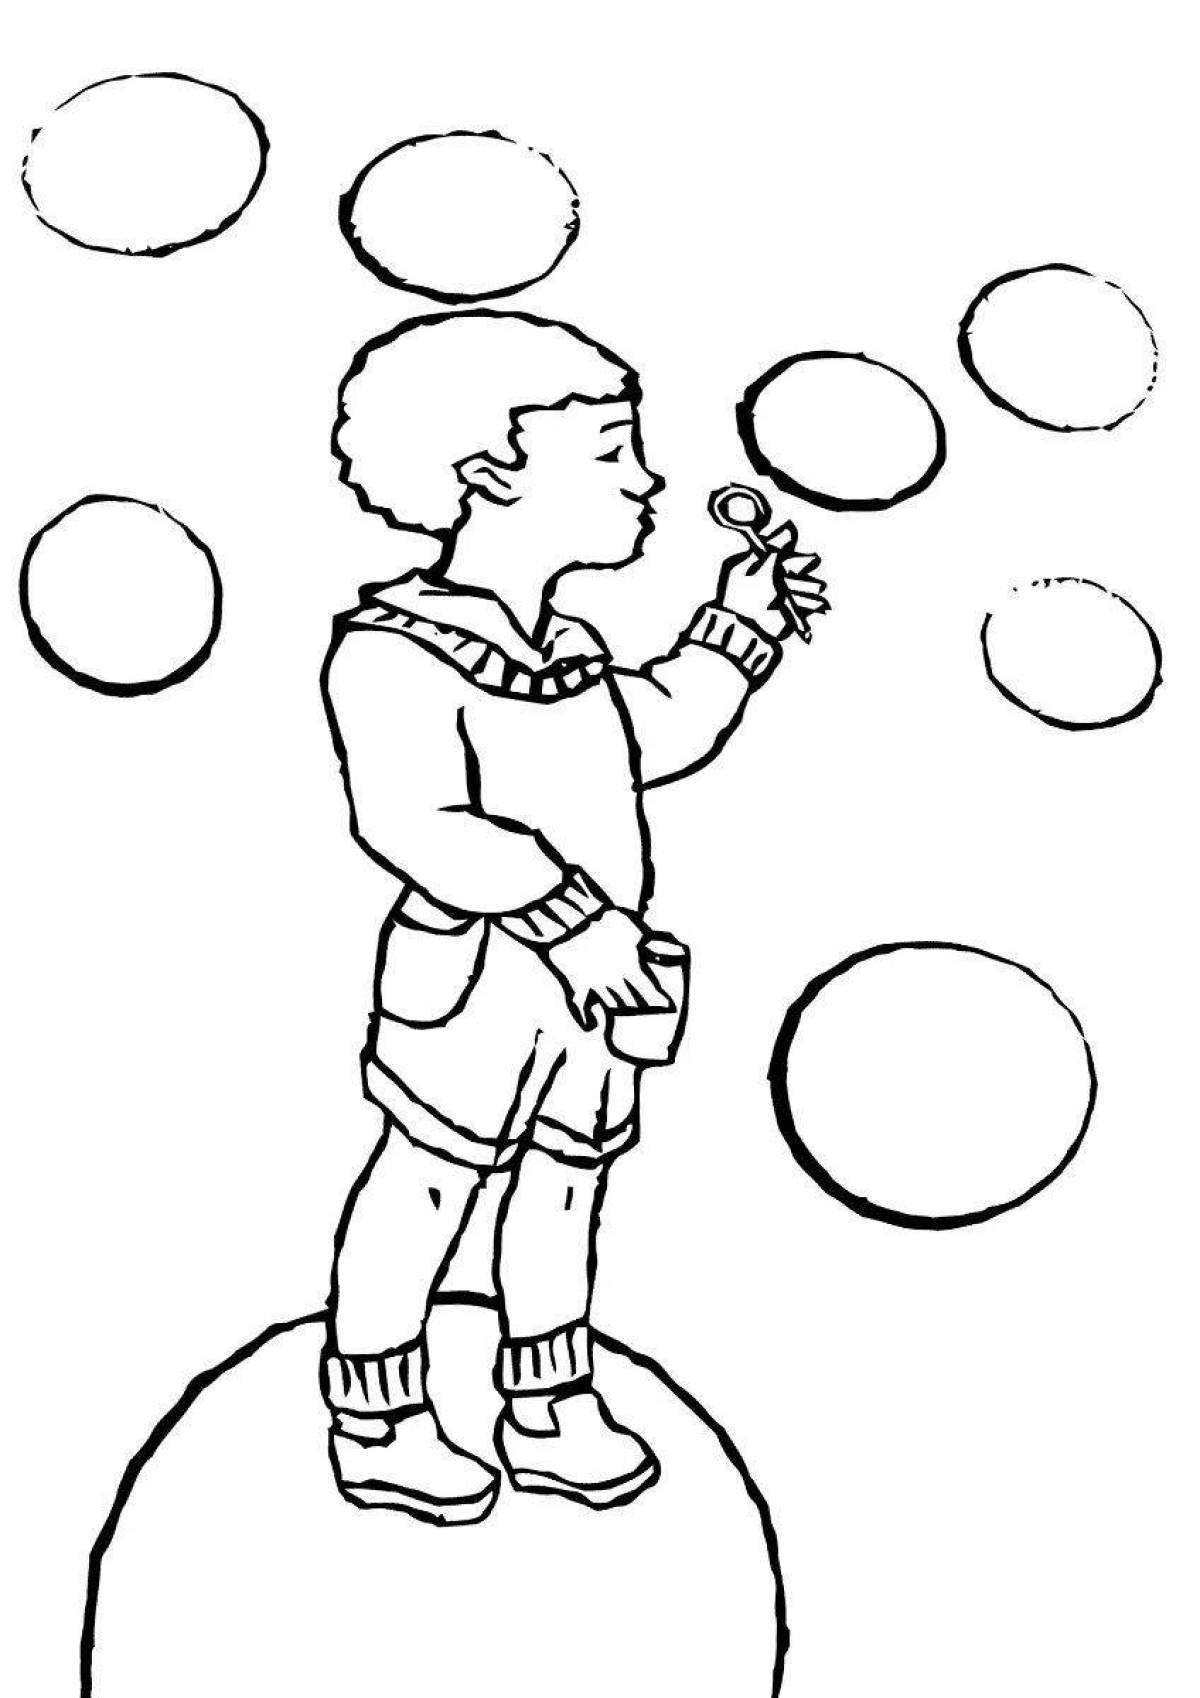 Sparkling bubbles for coloring